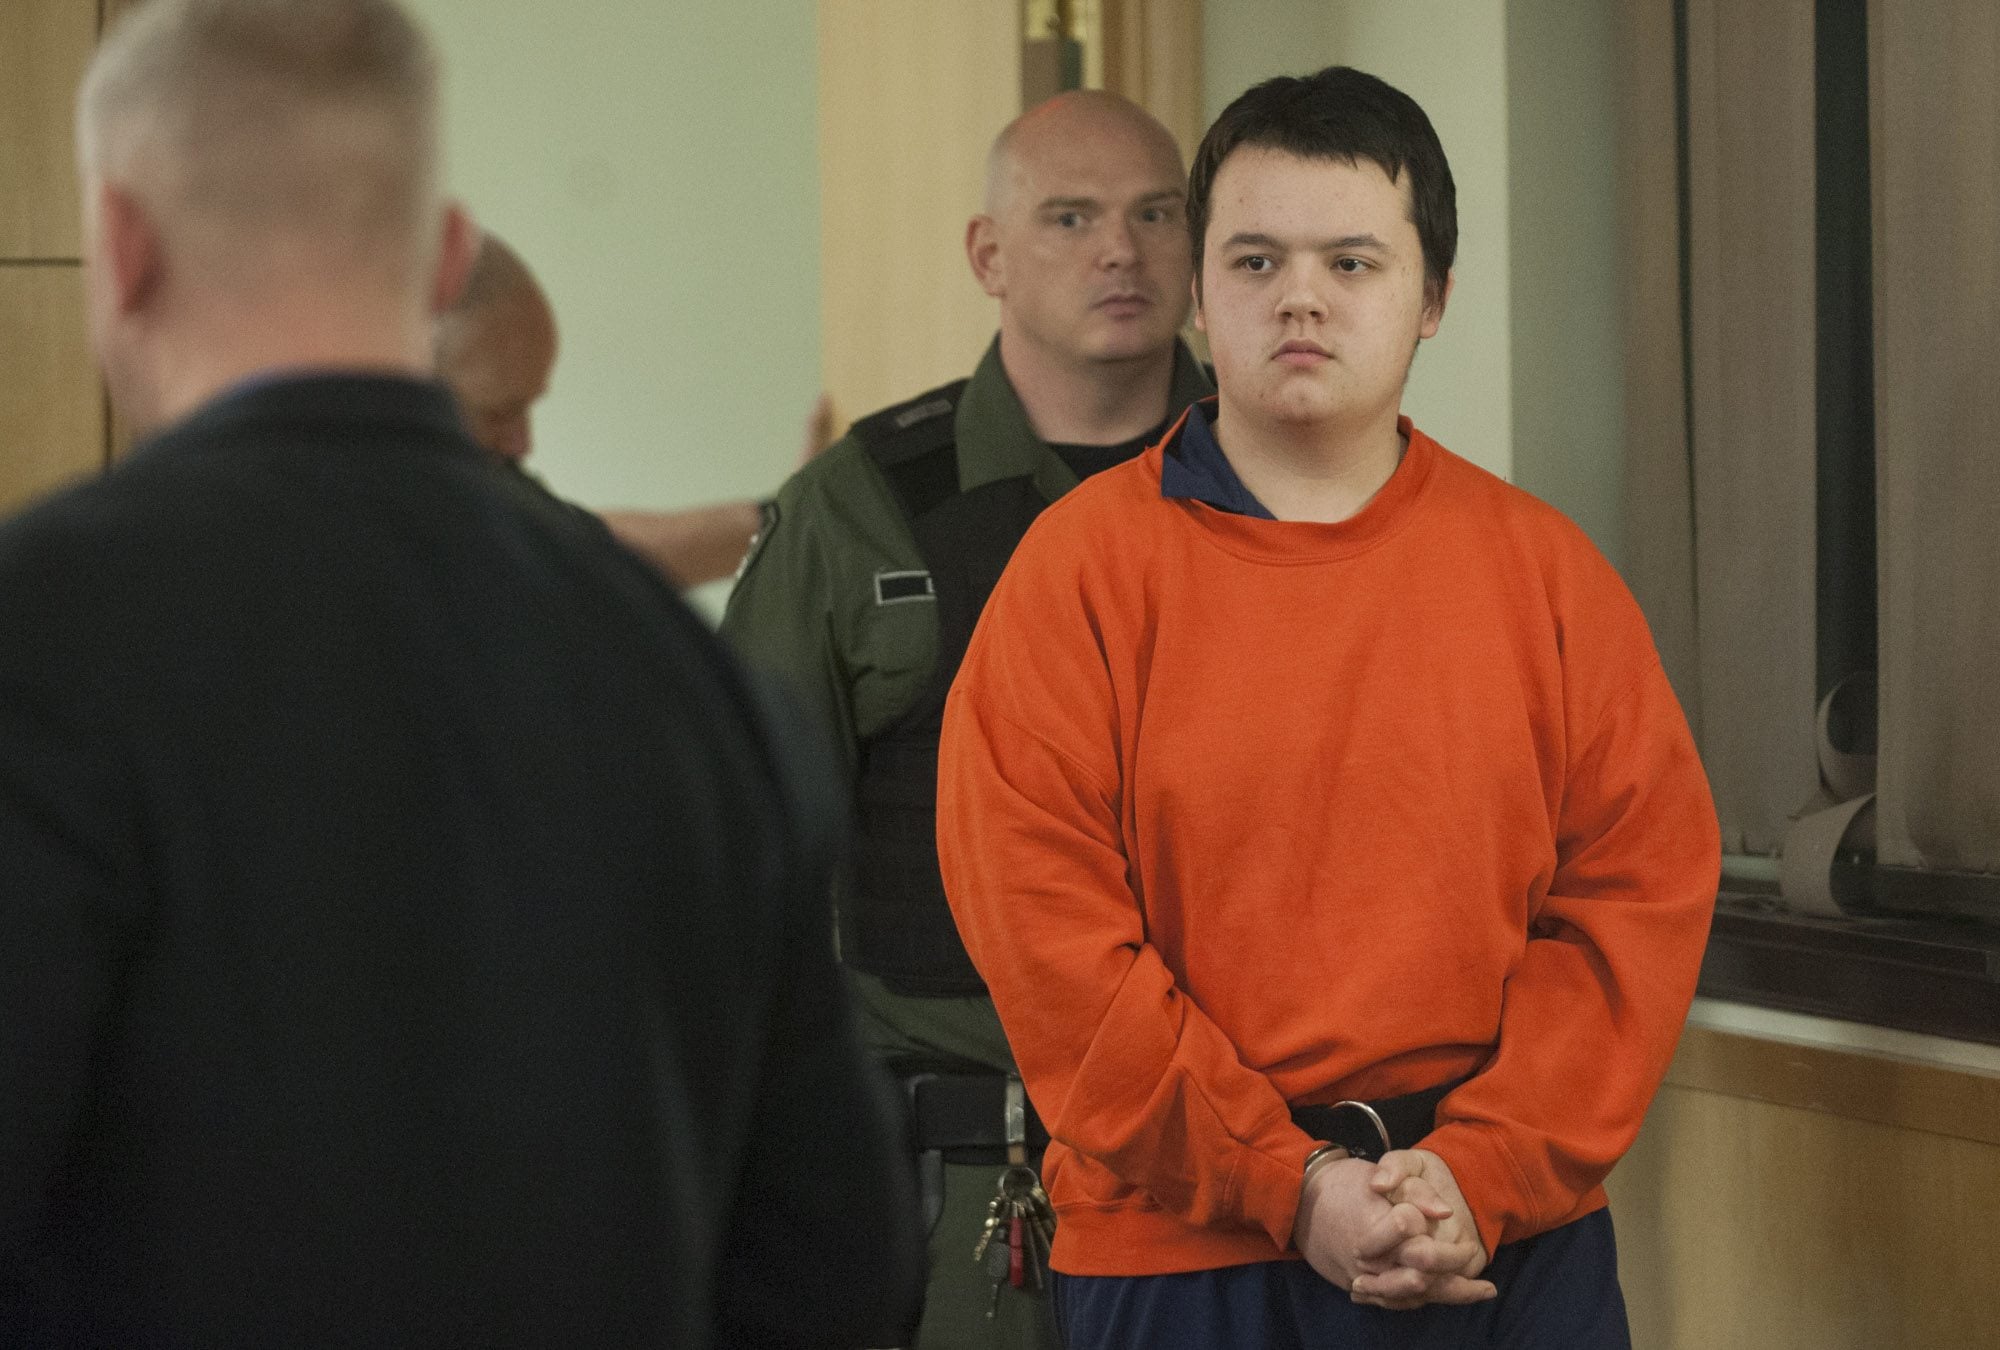 Columbia River High School student Christopher G. Philbrook makes a first appearance Feb. 12 in Clark County Superior Court for allegedly attacking another student with a metal baton. Philbrook was arraigned Wednesday on a charge of first-degree assault.